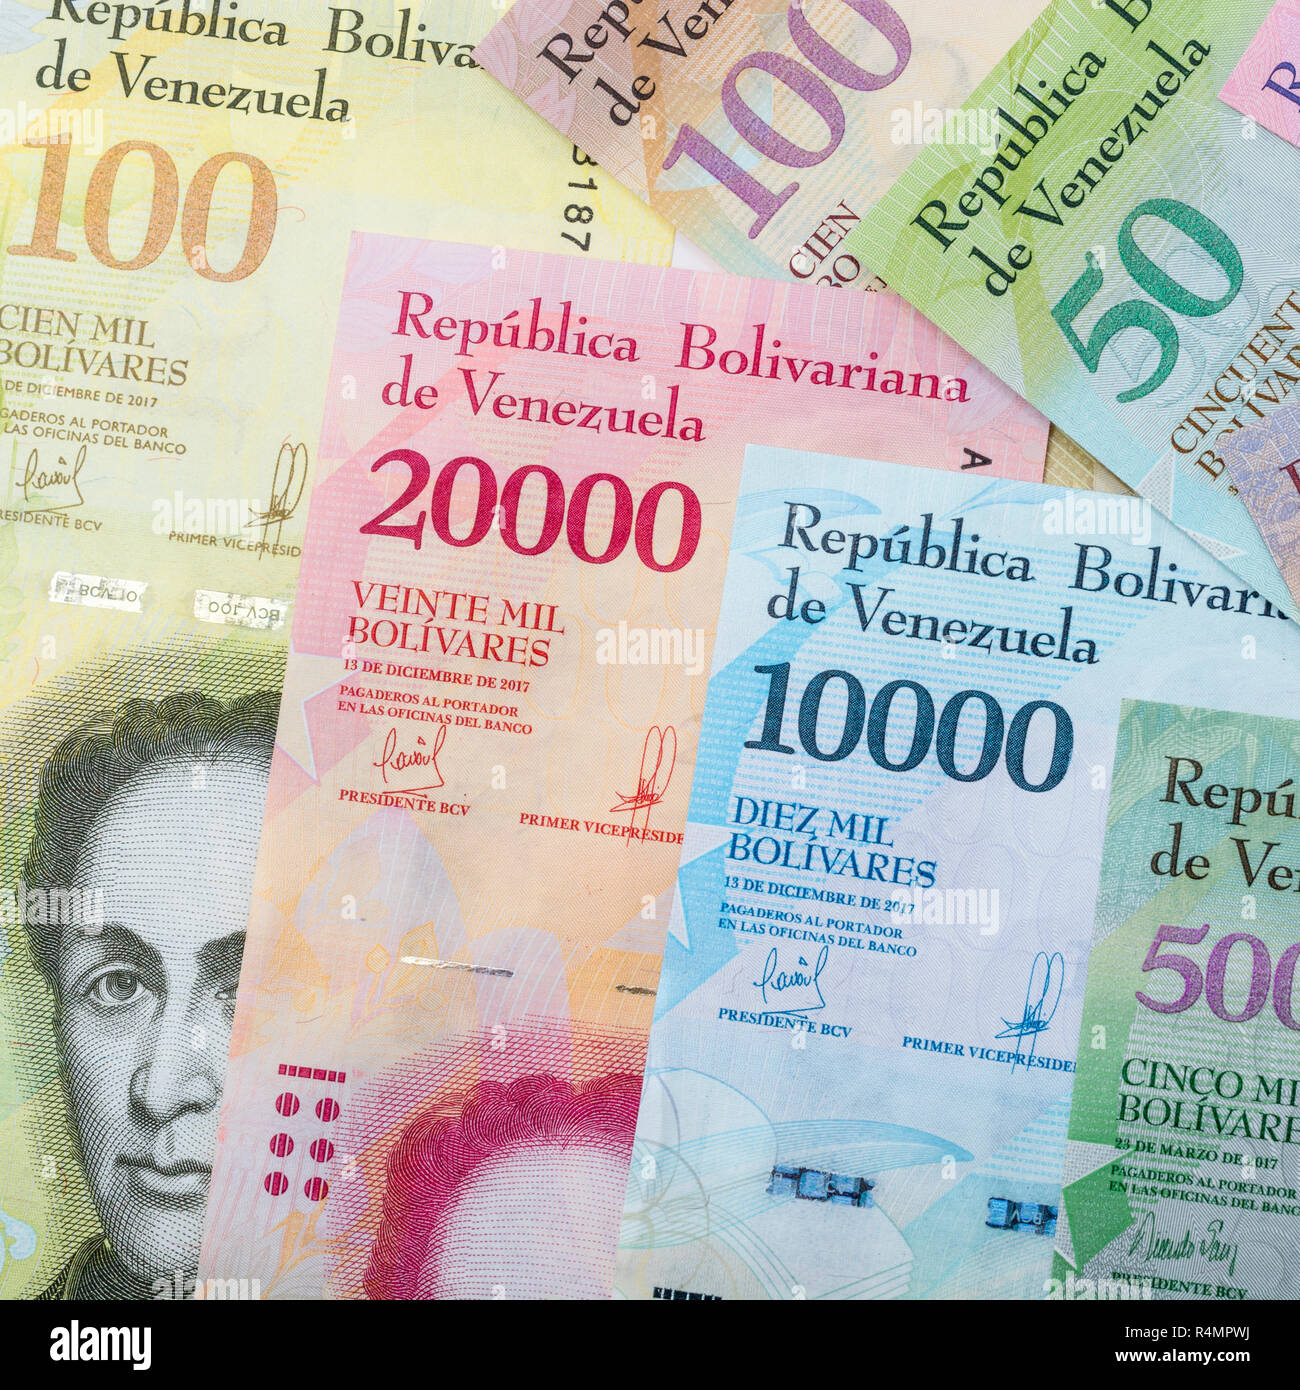 Venezuela Bolivar banknotes - metaphor for Hyperinflation in the Venezuelan economy, where banknotes are almost worthless. SEE ADDIT. NOTES Stock Photo